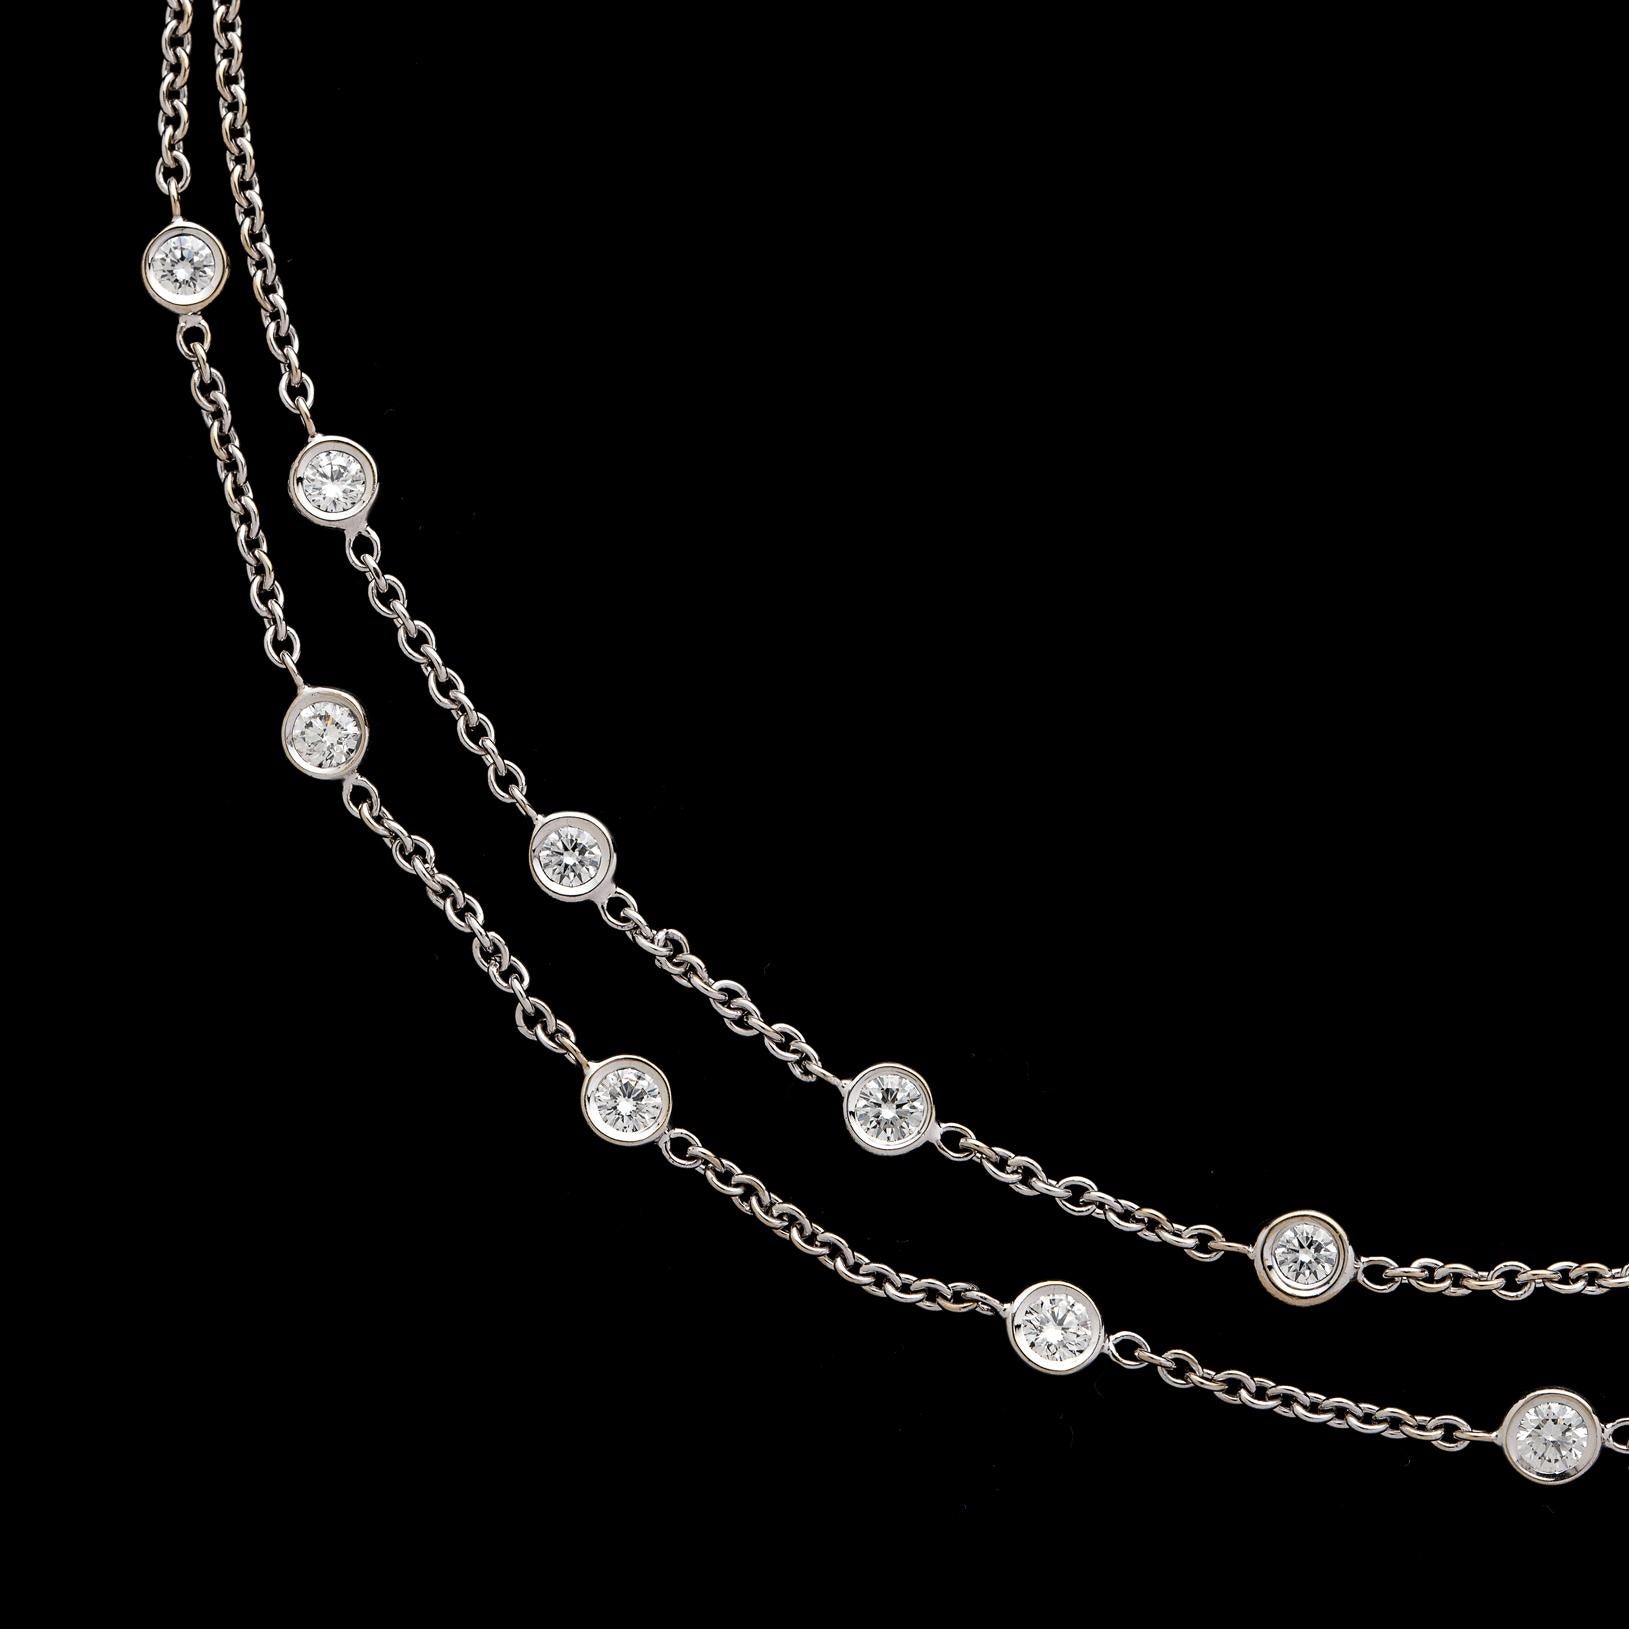 A delicate necklace with a bold look, this 18k white gold swag necklace is designed with two rows of 15 bezel-set round brilliant-cut diamonds totaling 1.50 carats, then finished with a double back chain. The necklace measures 16 inches, and weighs